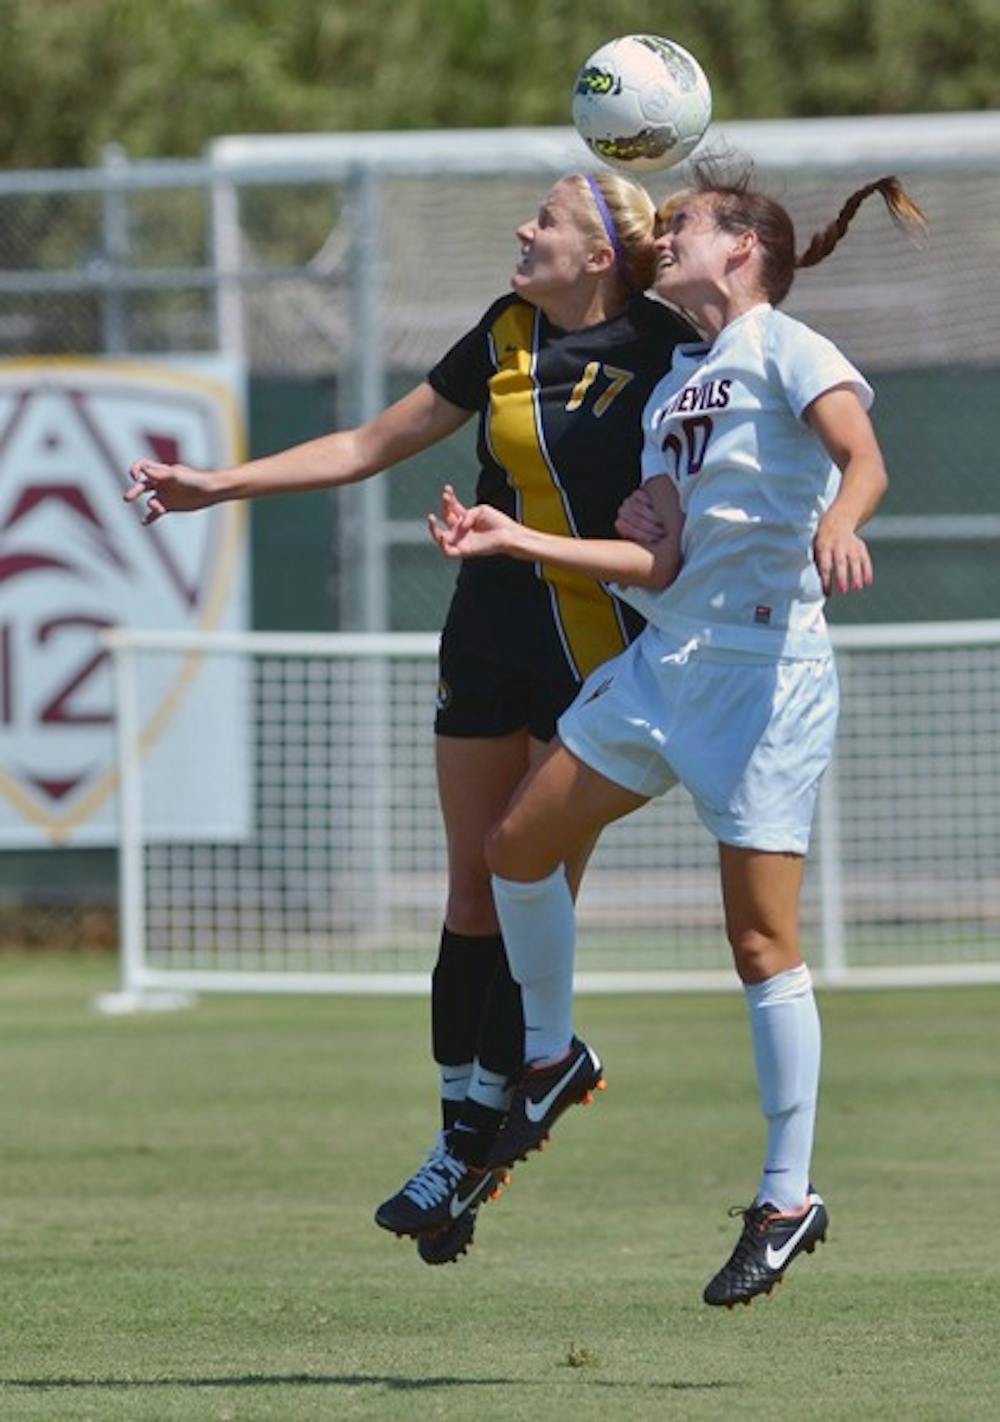 HEAD GAME: Redshirt freshman Miah Mollay heads a ball earlier this season. The Sun Devils tried this week to shake off a 5-0 loss to UCF. (Photo by Aaron Lavinsky)